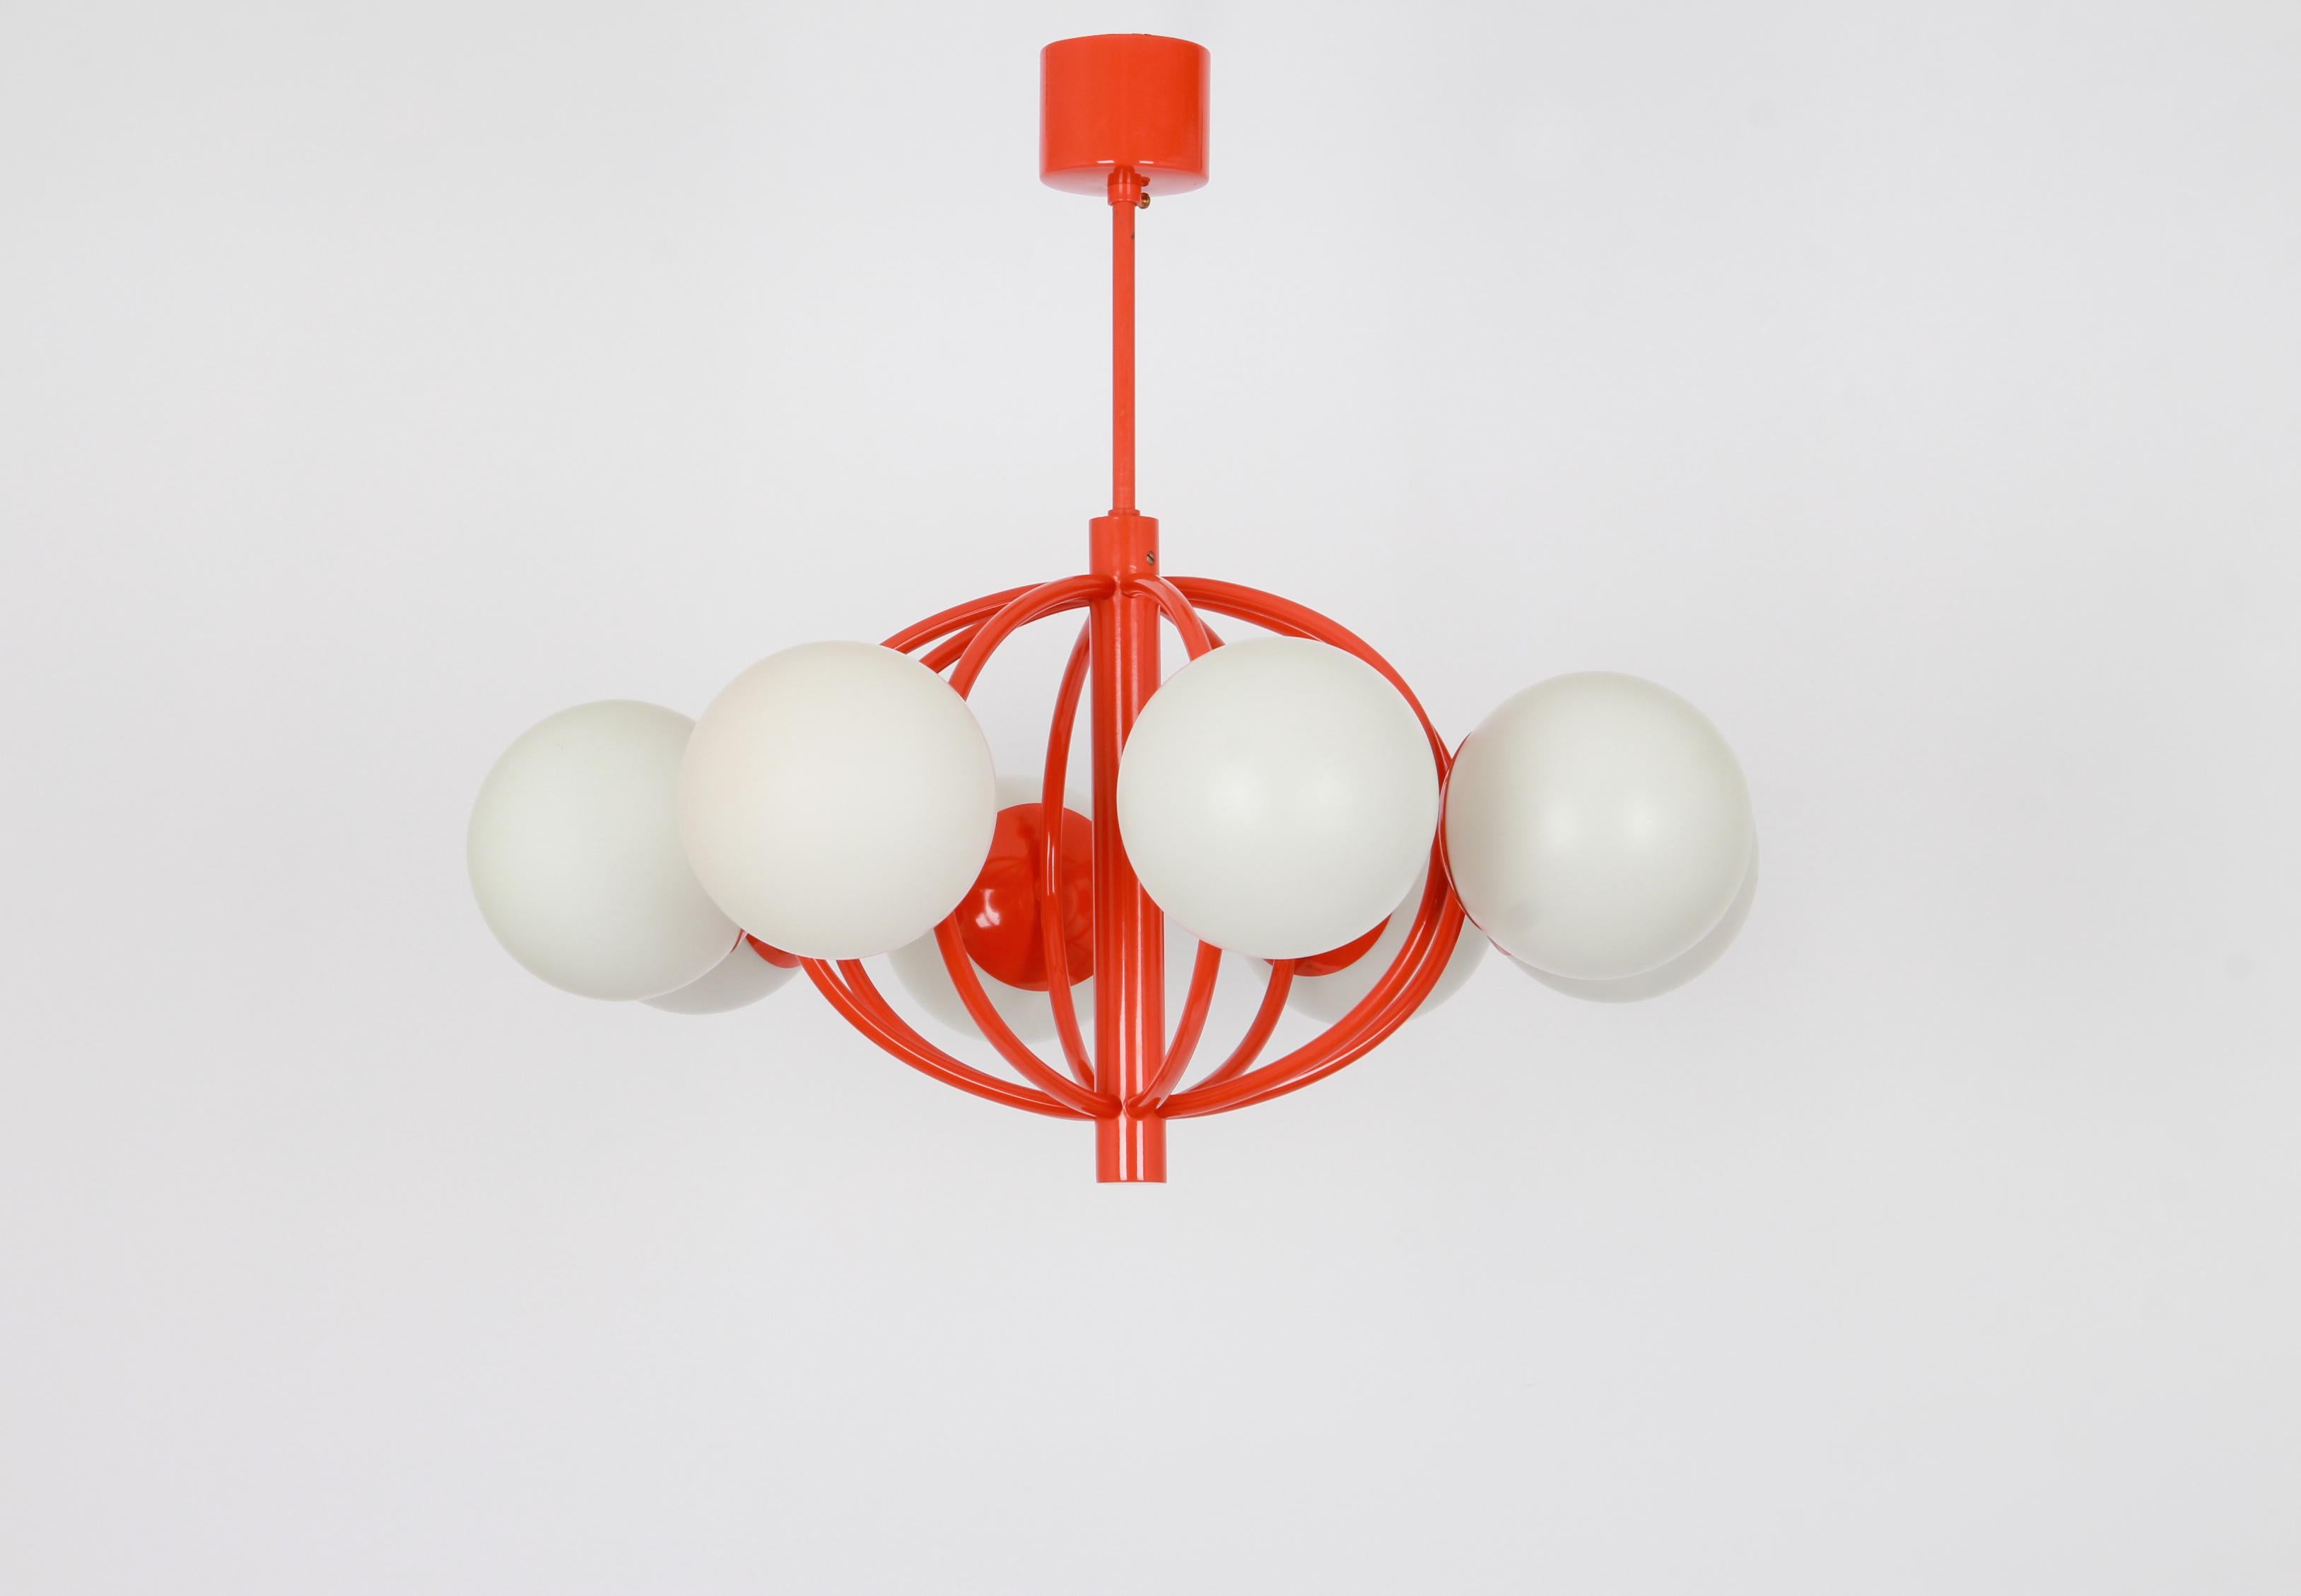 Midcentury vintage pendant in orange color made by Kaiser Leuchten, Germany with 8 opal glass balls.
High quality and in very good condition. Cleaned, well-wired and ready to use. 

The fixture requires 8 x E14 small bulbs with 40W max each.
Light